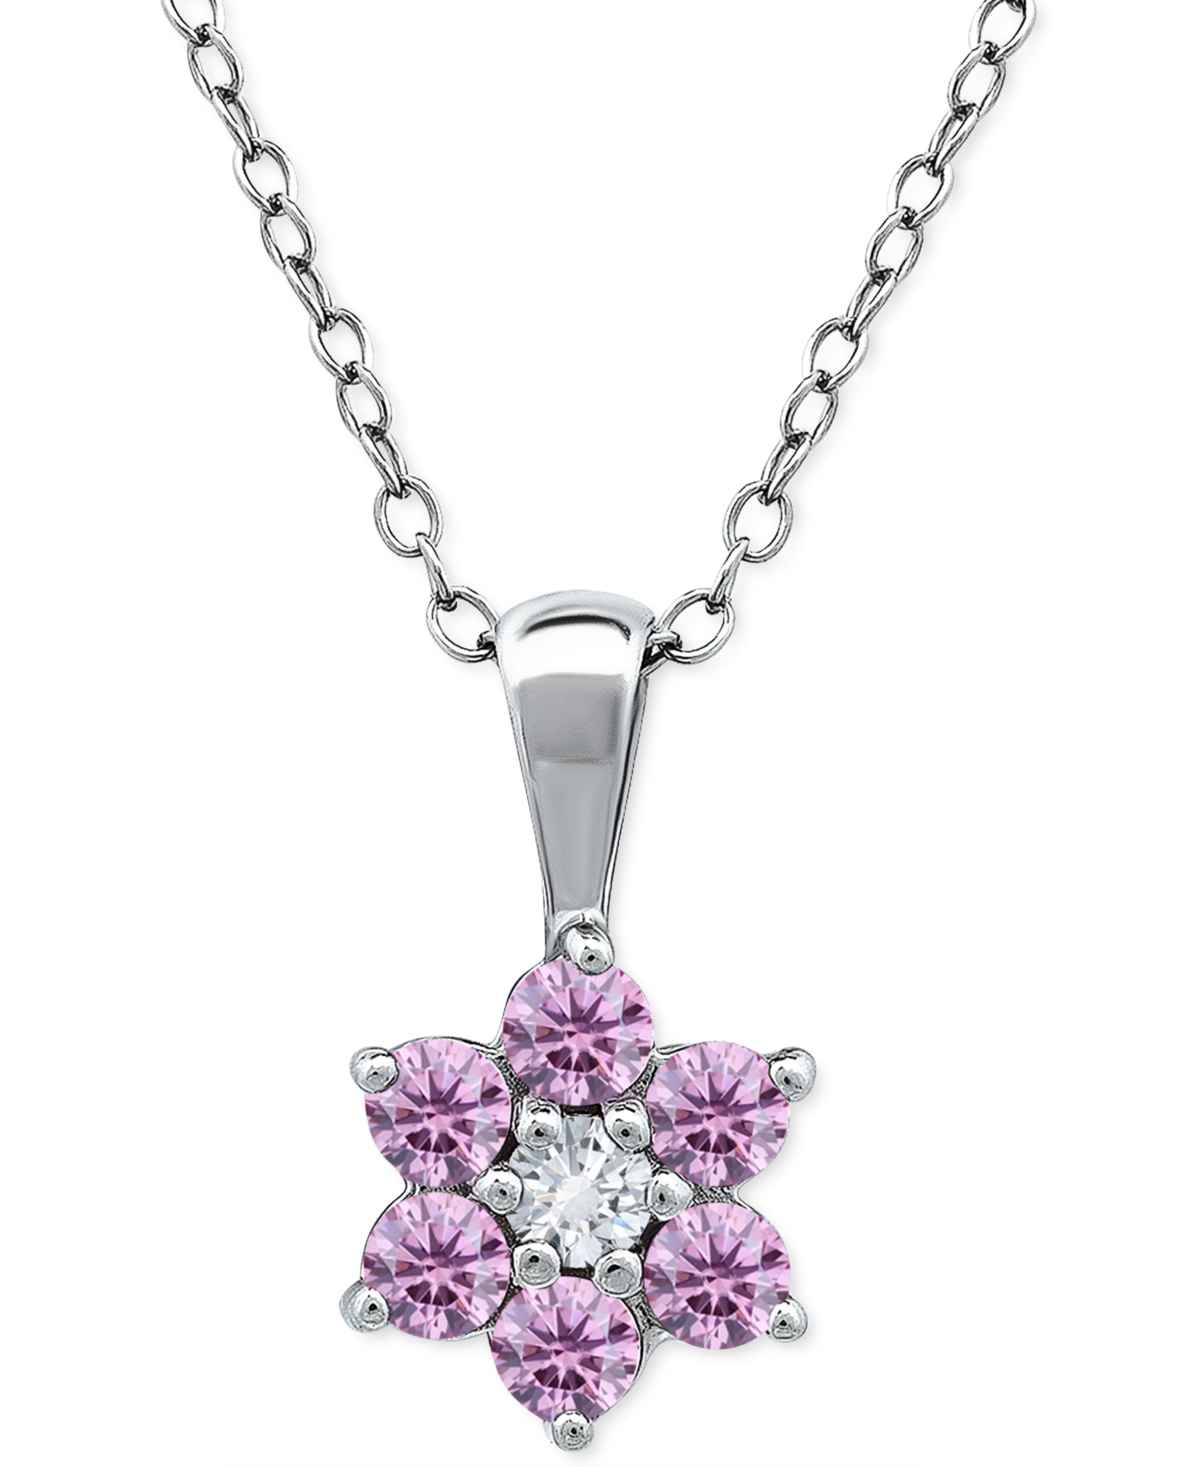 Giani Bernini Pink & White Cubic Zirconia Flower Necklace In Sterling Silver, 16" + 2" Extender, Created For Macy'